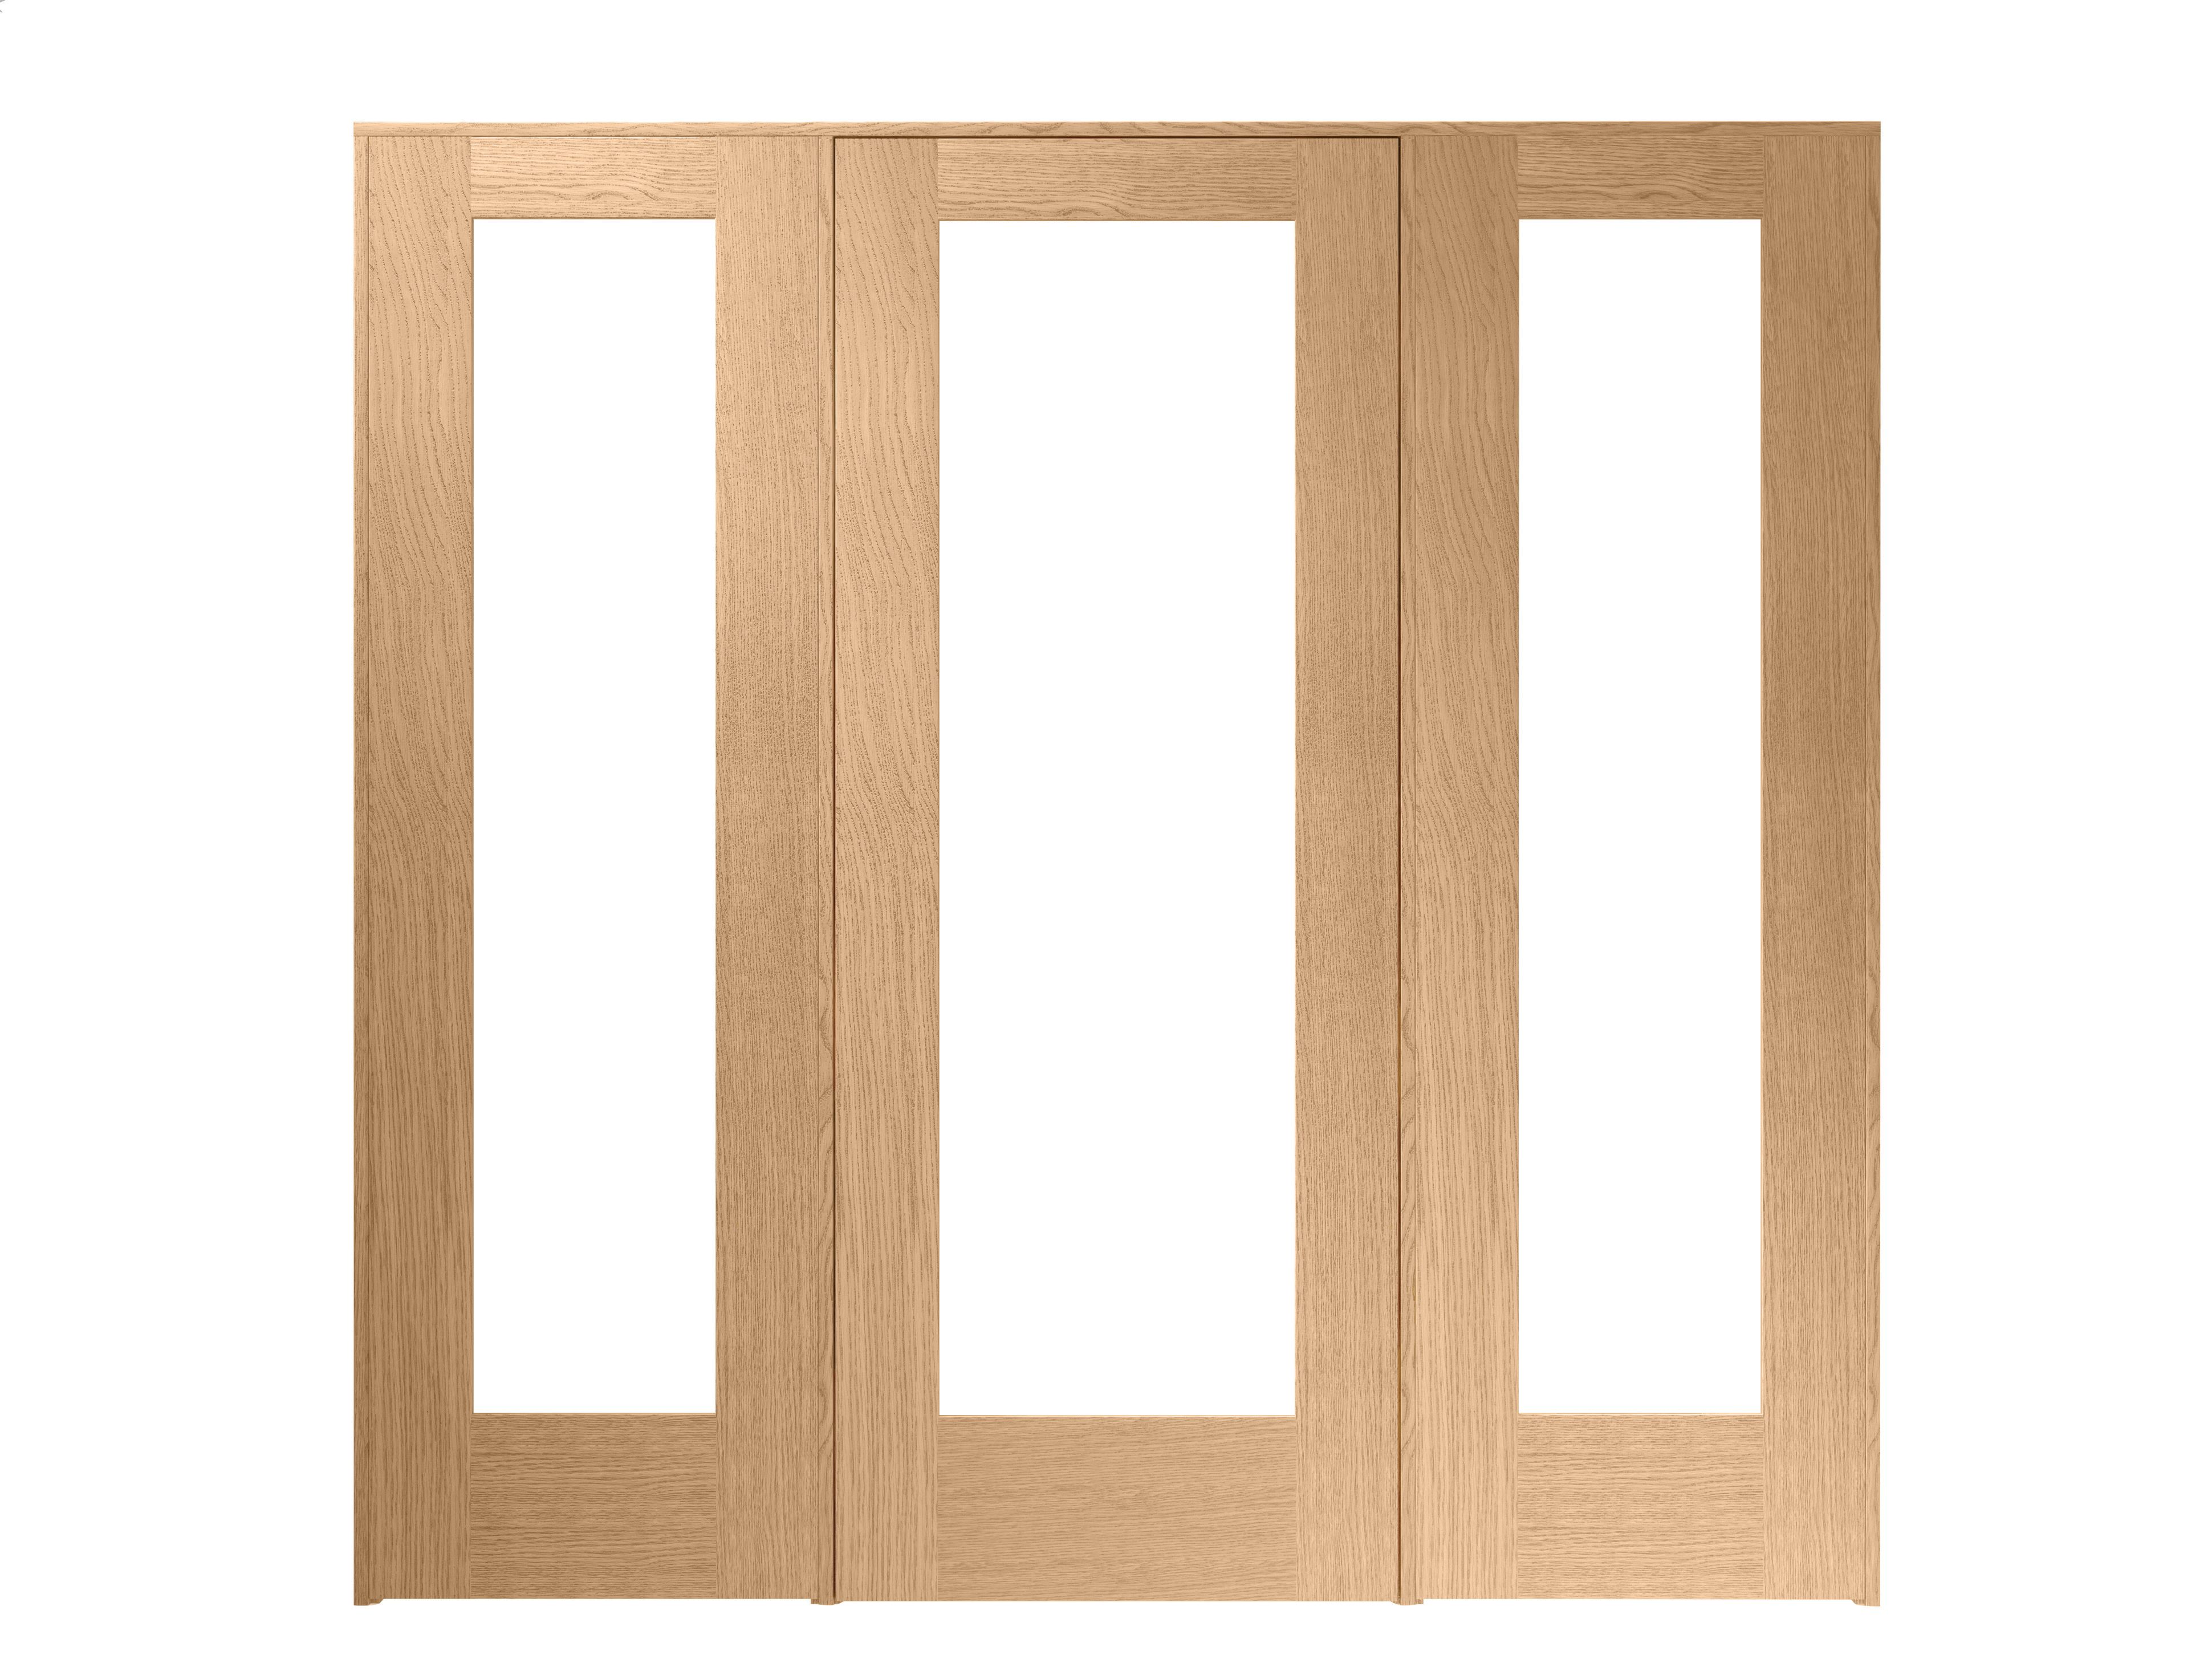 Wickes Oxford Fully Glazed Oak Internal Room Divider Door with 2 Side Panels - 2017 x 2078mm